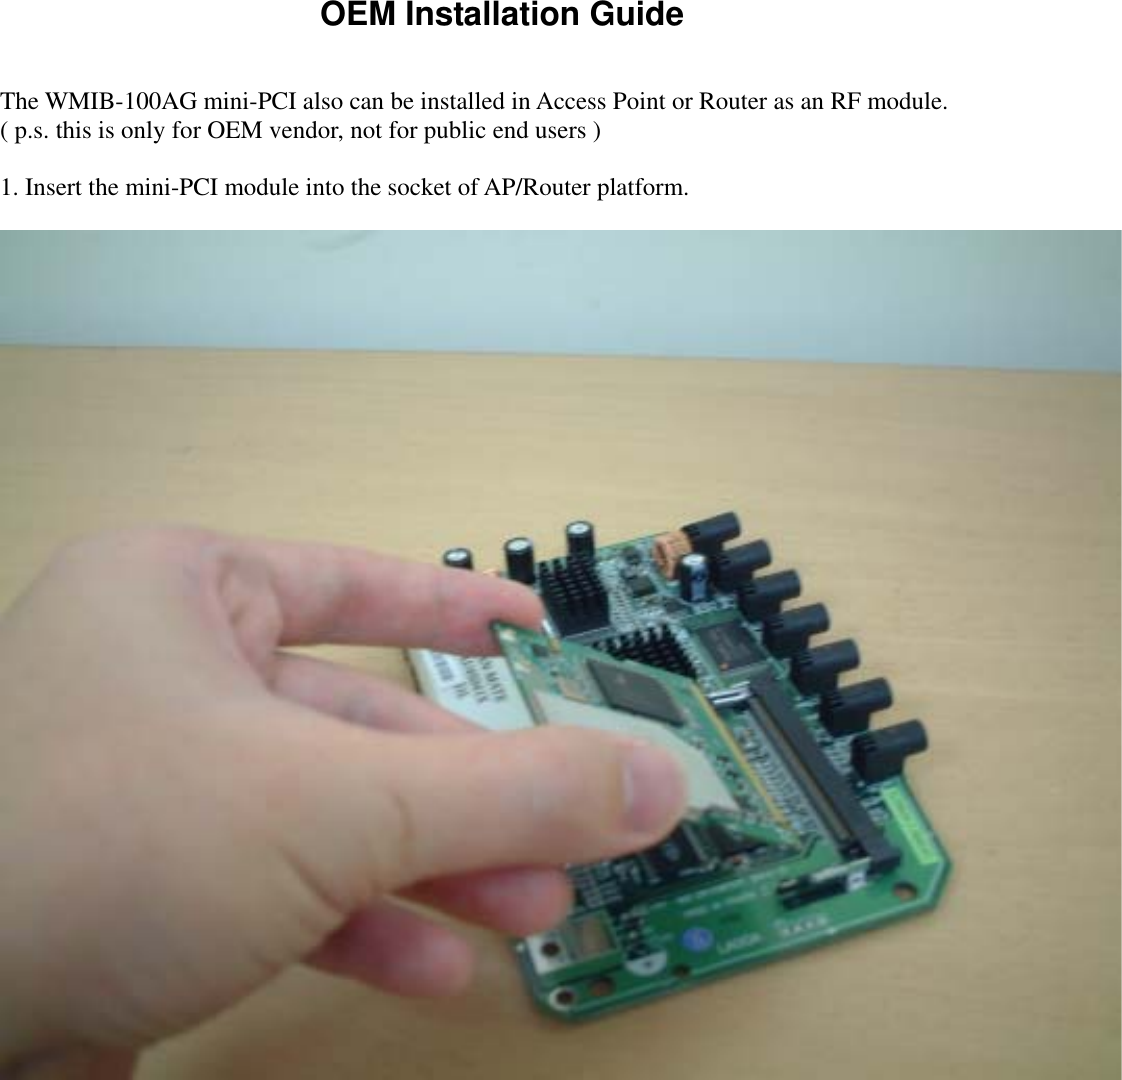 OEM Installation Guide  The WMIB-100AG mini-PCI also can be installed in Access Point or Router as an RF module.   ( p.s. this is only for OEM vendor, not for public end users )    1. Insert the mini-PCI module into the socket of AP/Router platform.      